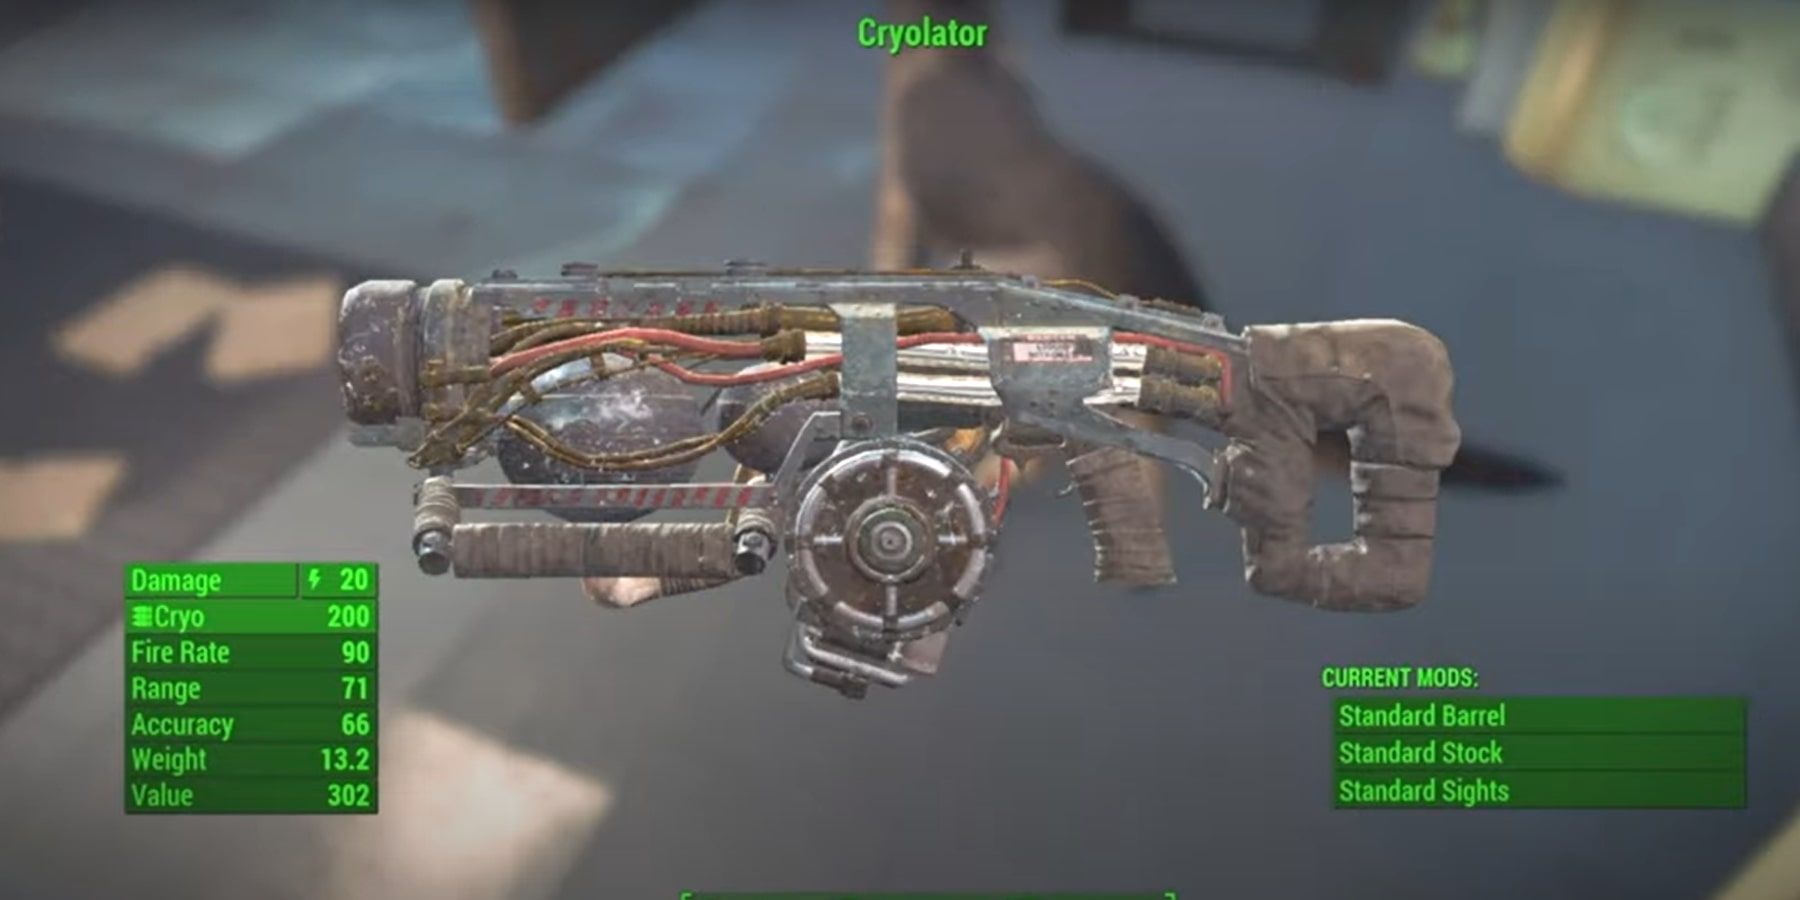 The Cryolator in Fallout 4